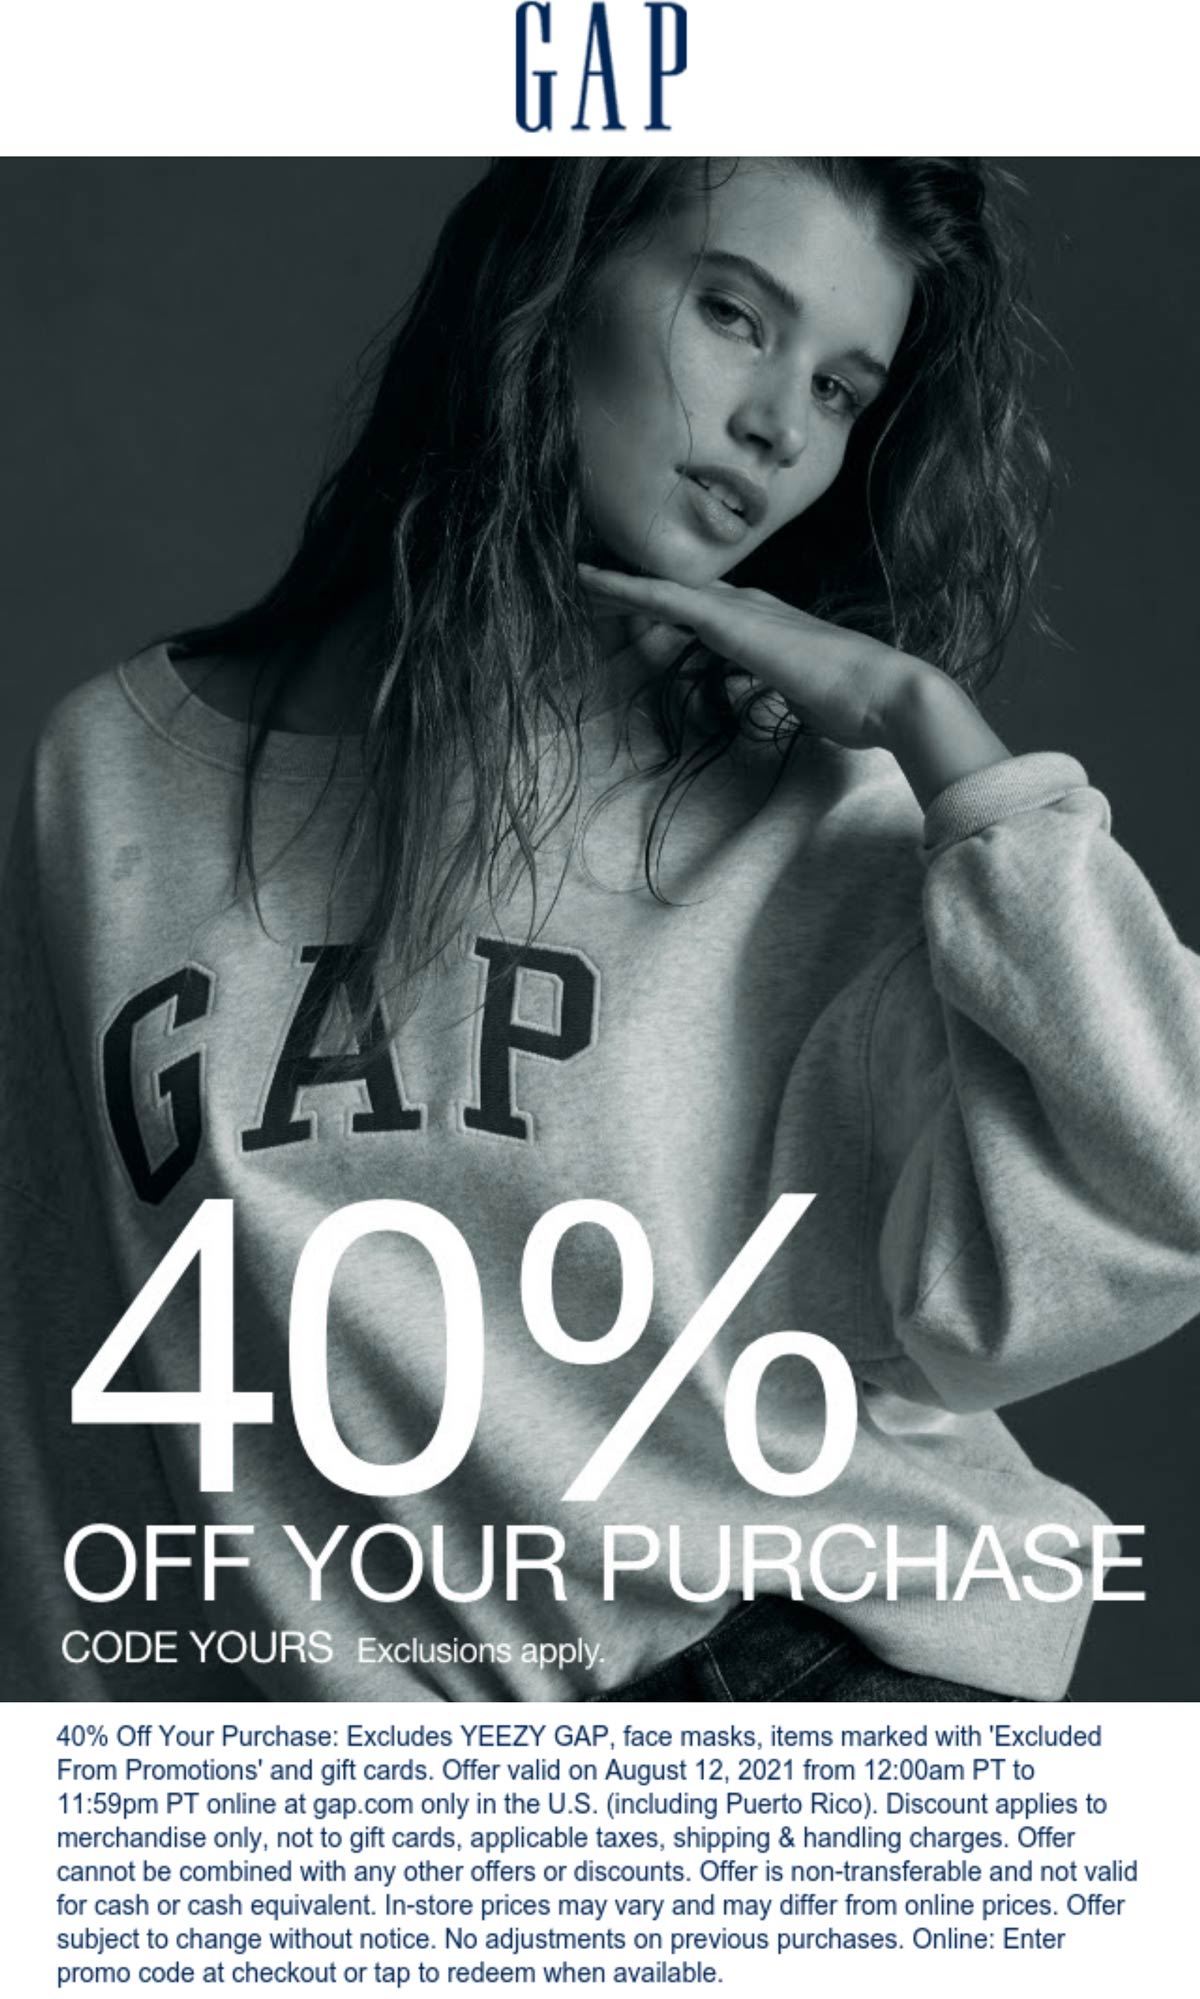 Gap stores Coupon  40% off online today at Gap via promo code YOURS #gap 